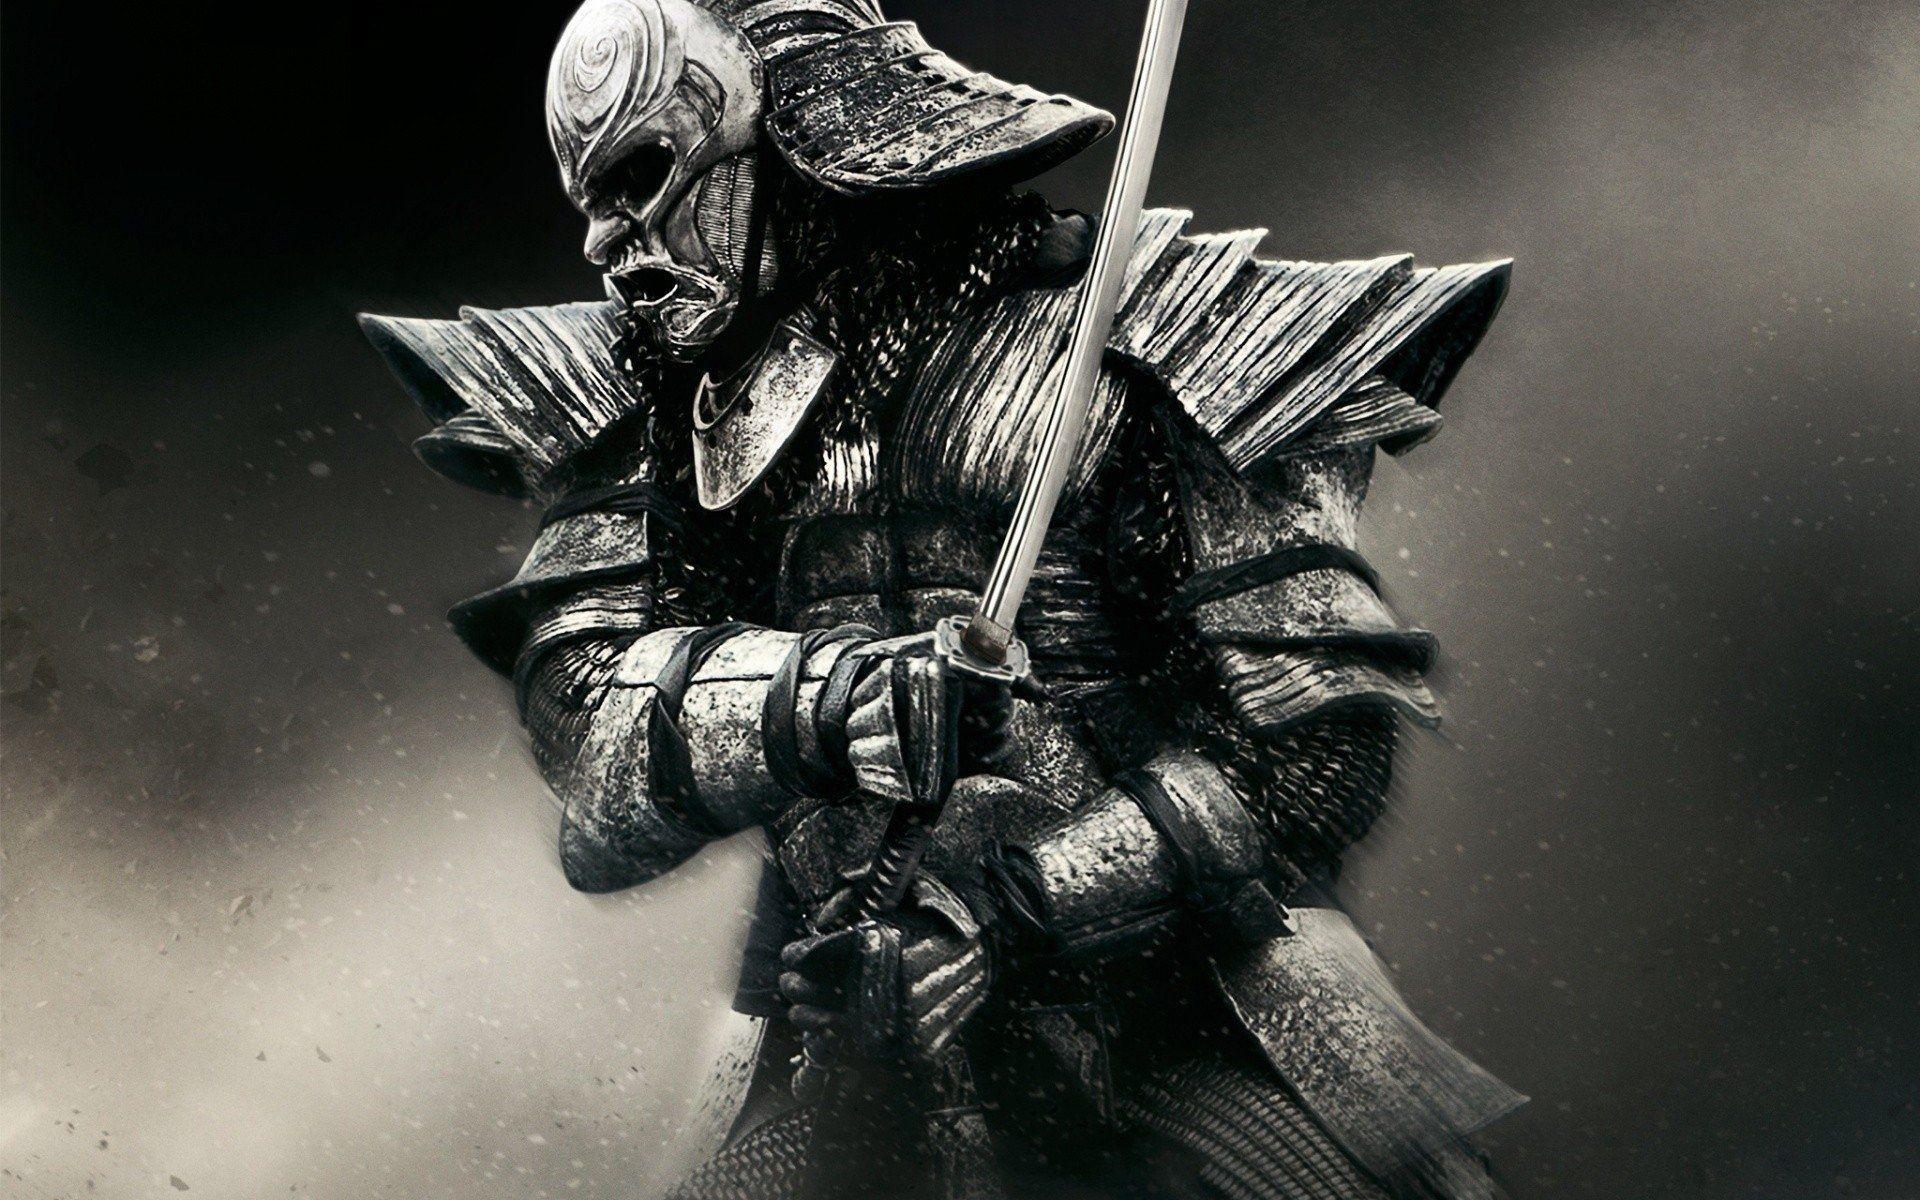 The Last Ronin wallpaper by F0ZZ13  Download on ZEDGE  6030